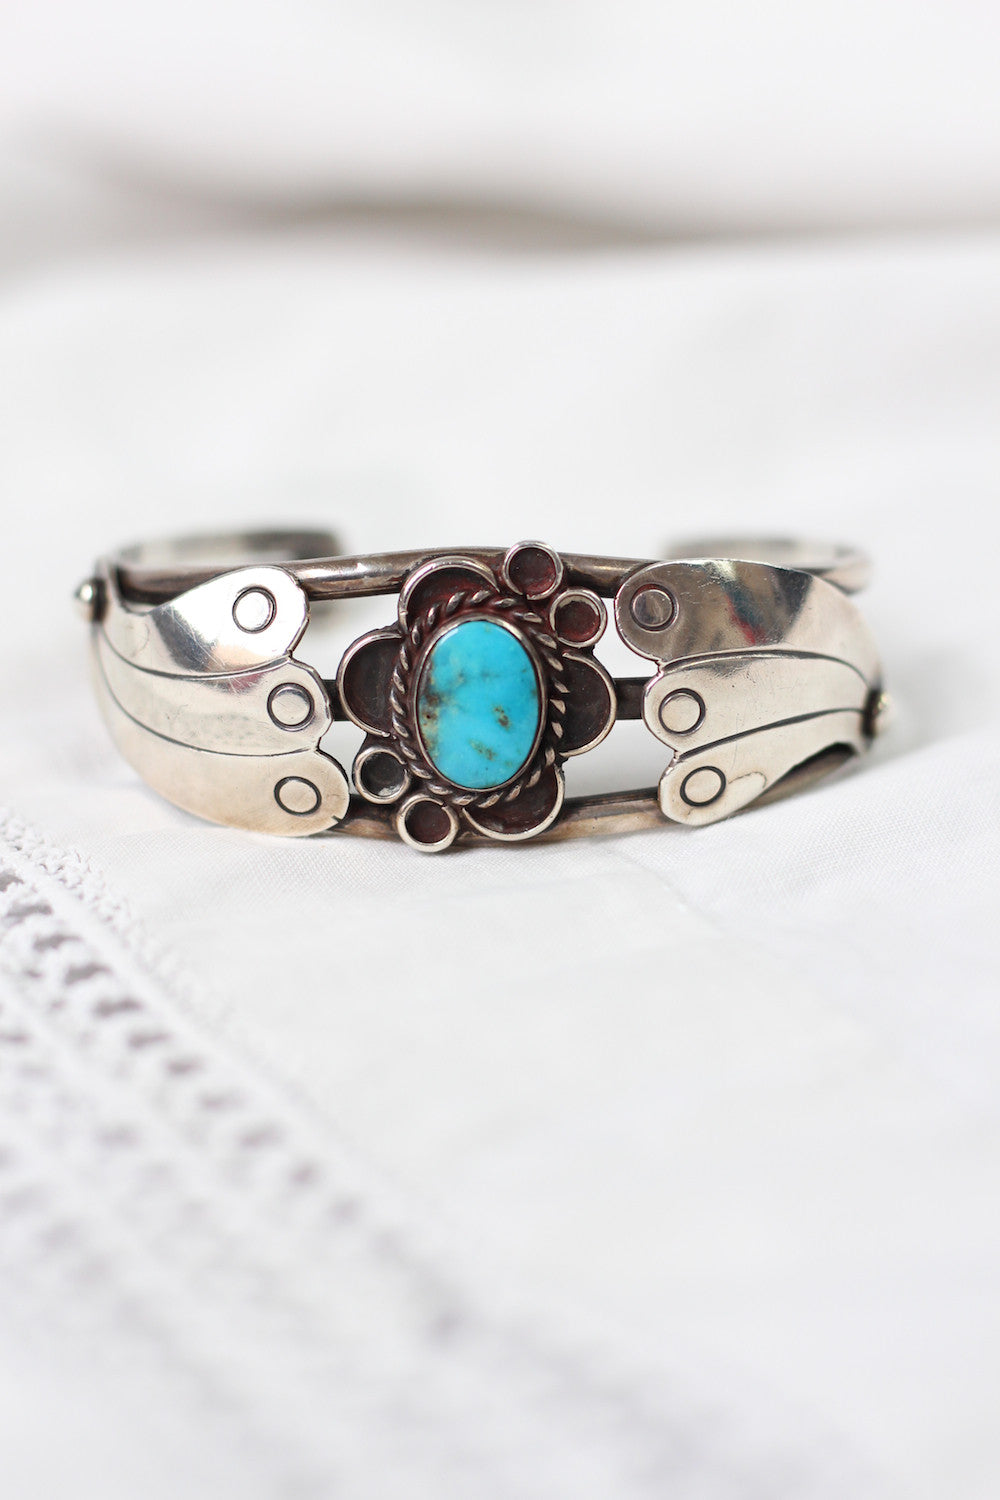 Oh Hold- Vintage Sterling Silver and Turquoise Flower Cuff